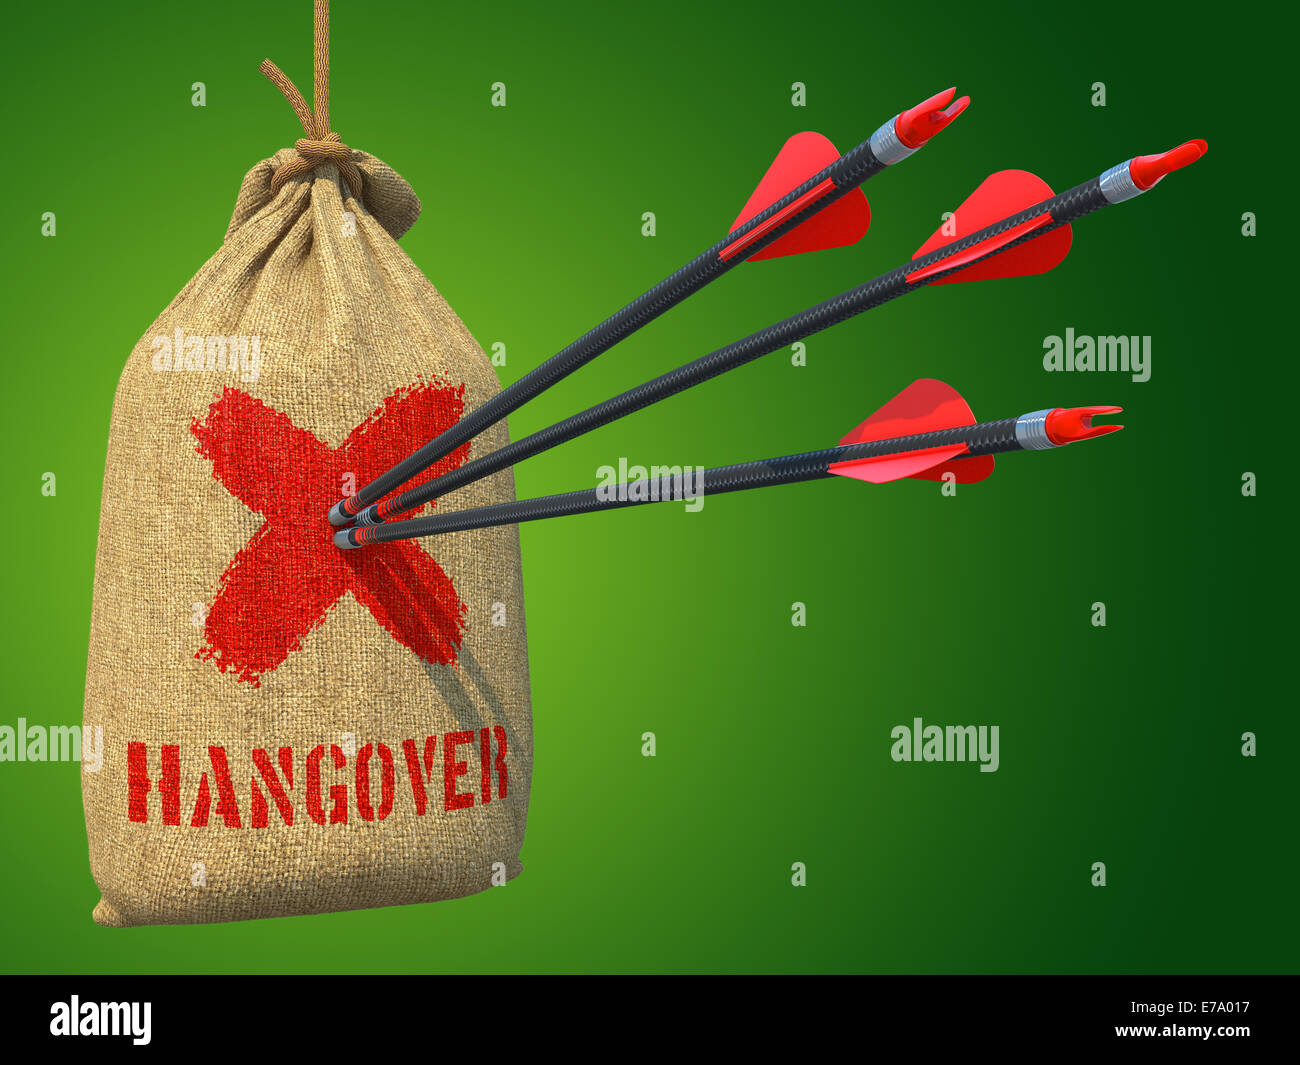 Hangover - Arrows Hit in Red Mark Target. Stock Photo